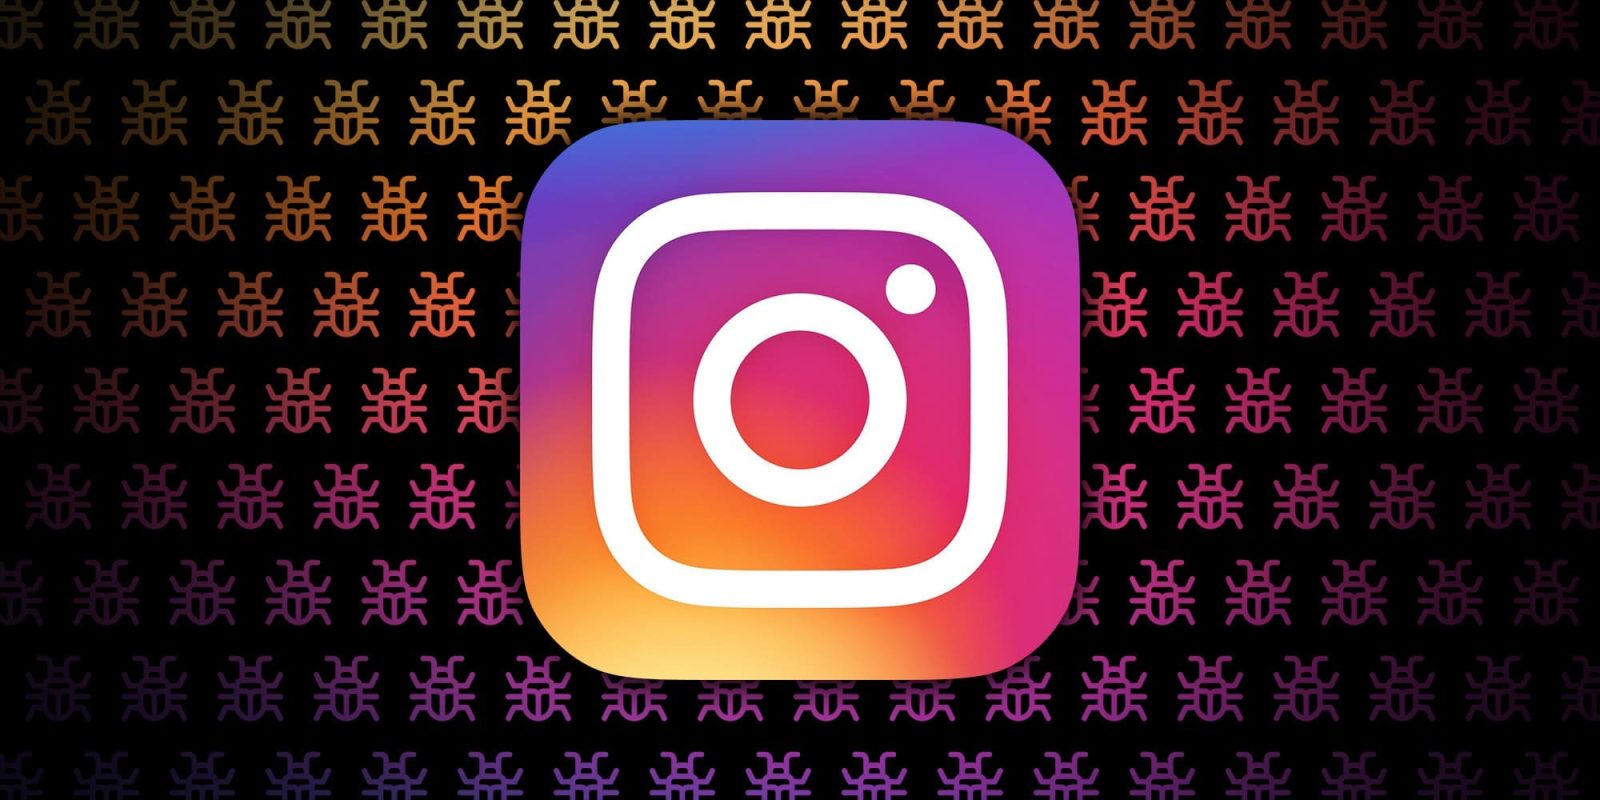 Instagram bug affecting some users causing iOS app to crash on opening